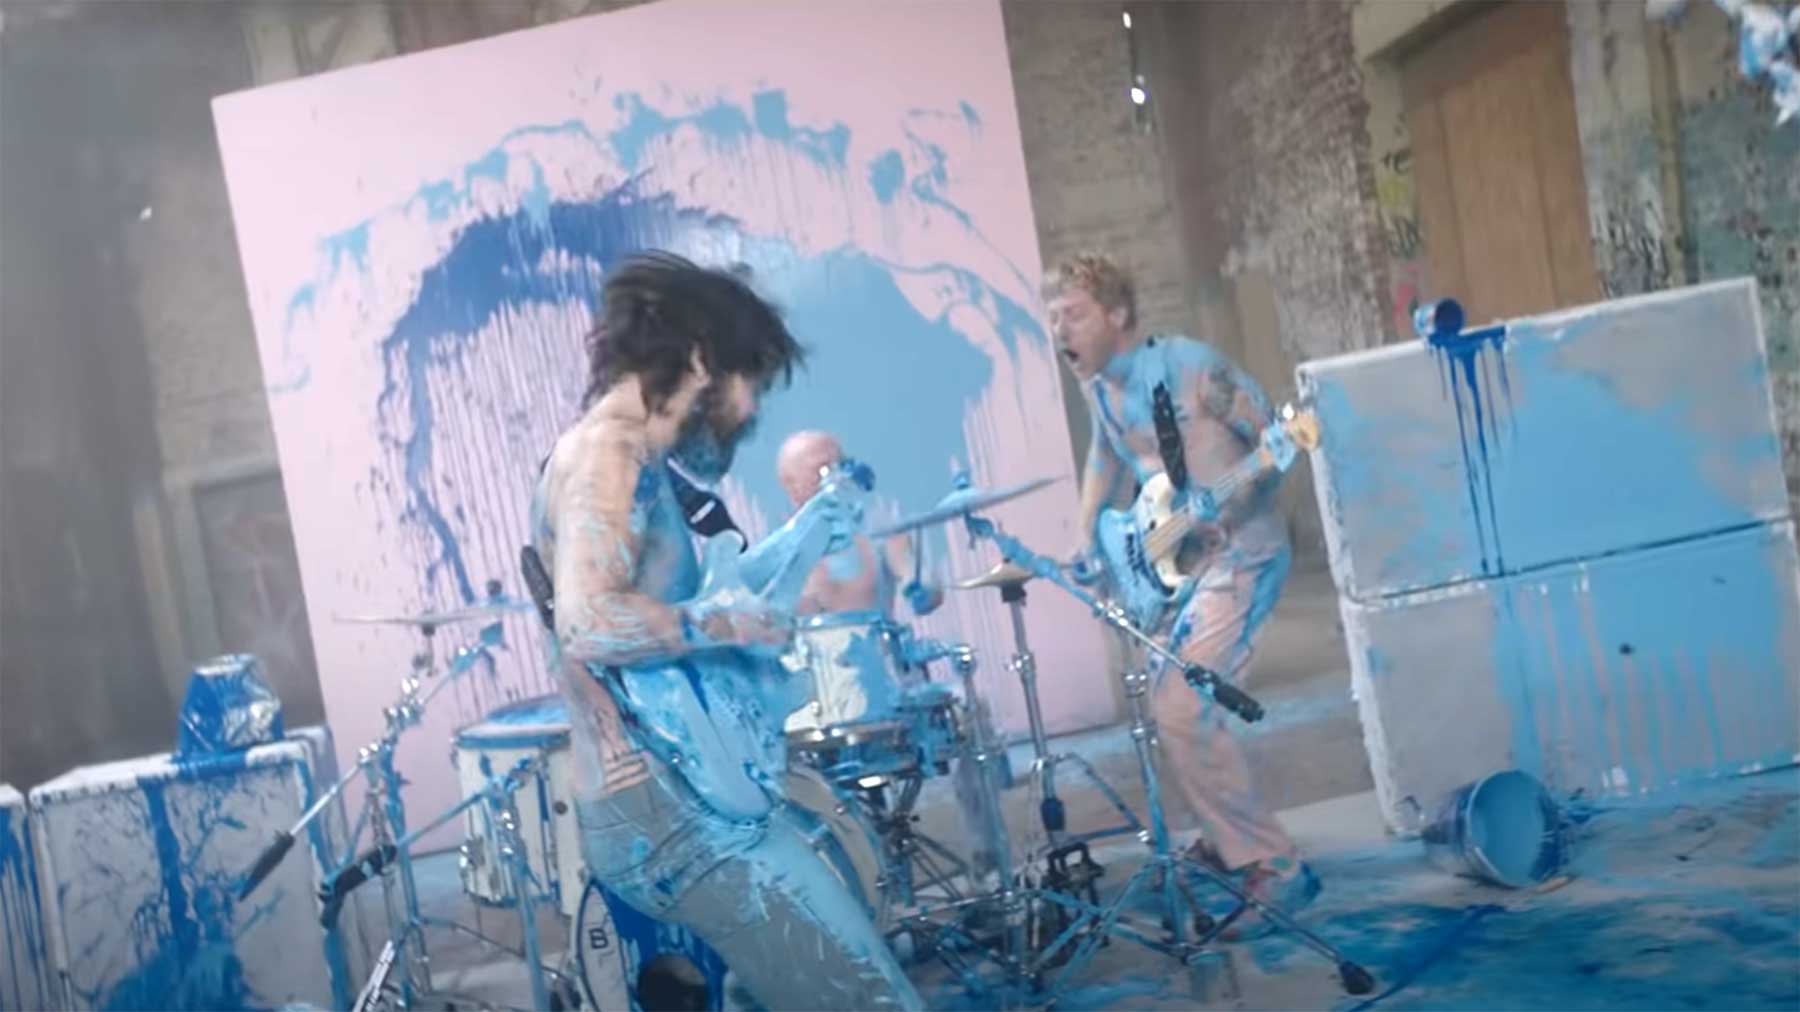 Musikvideo: Biffy Clyro - "A Hunger In Your Haunt" / "Unknown Male 01" Biffy-Clyro-A-Hunger-In-Your-Haunt-Unknown-Male-01-musikvideo 